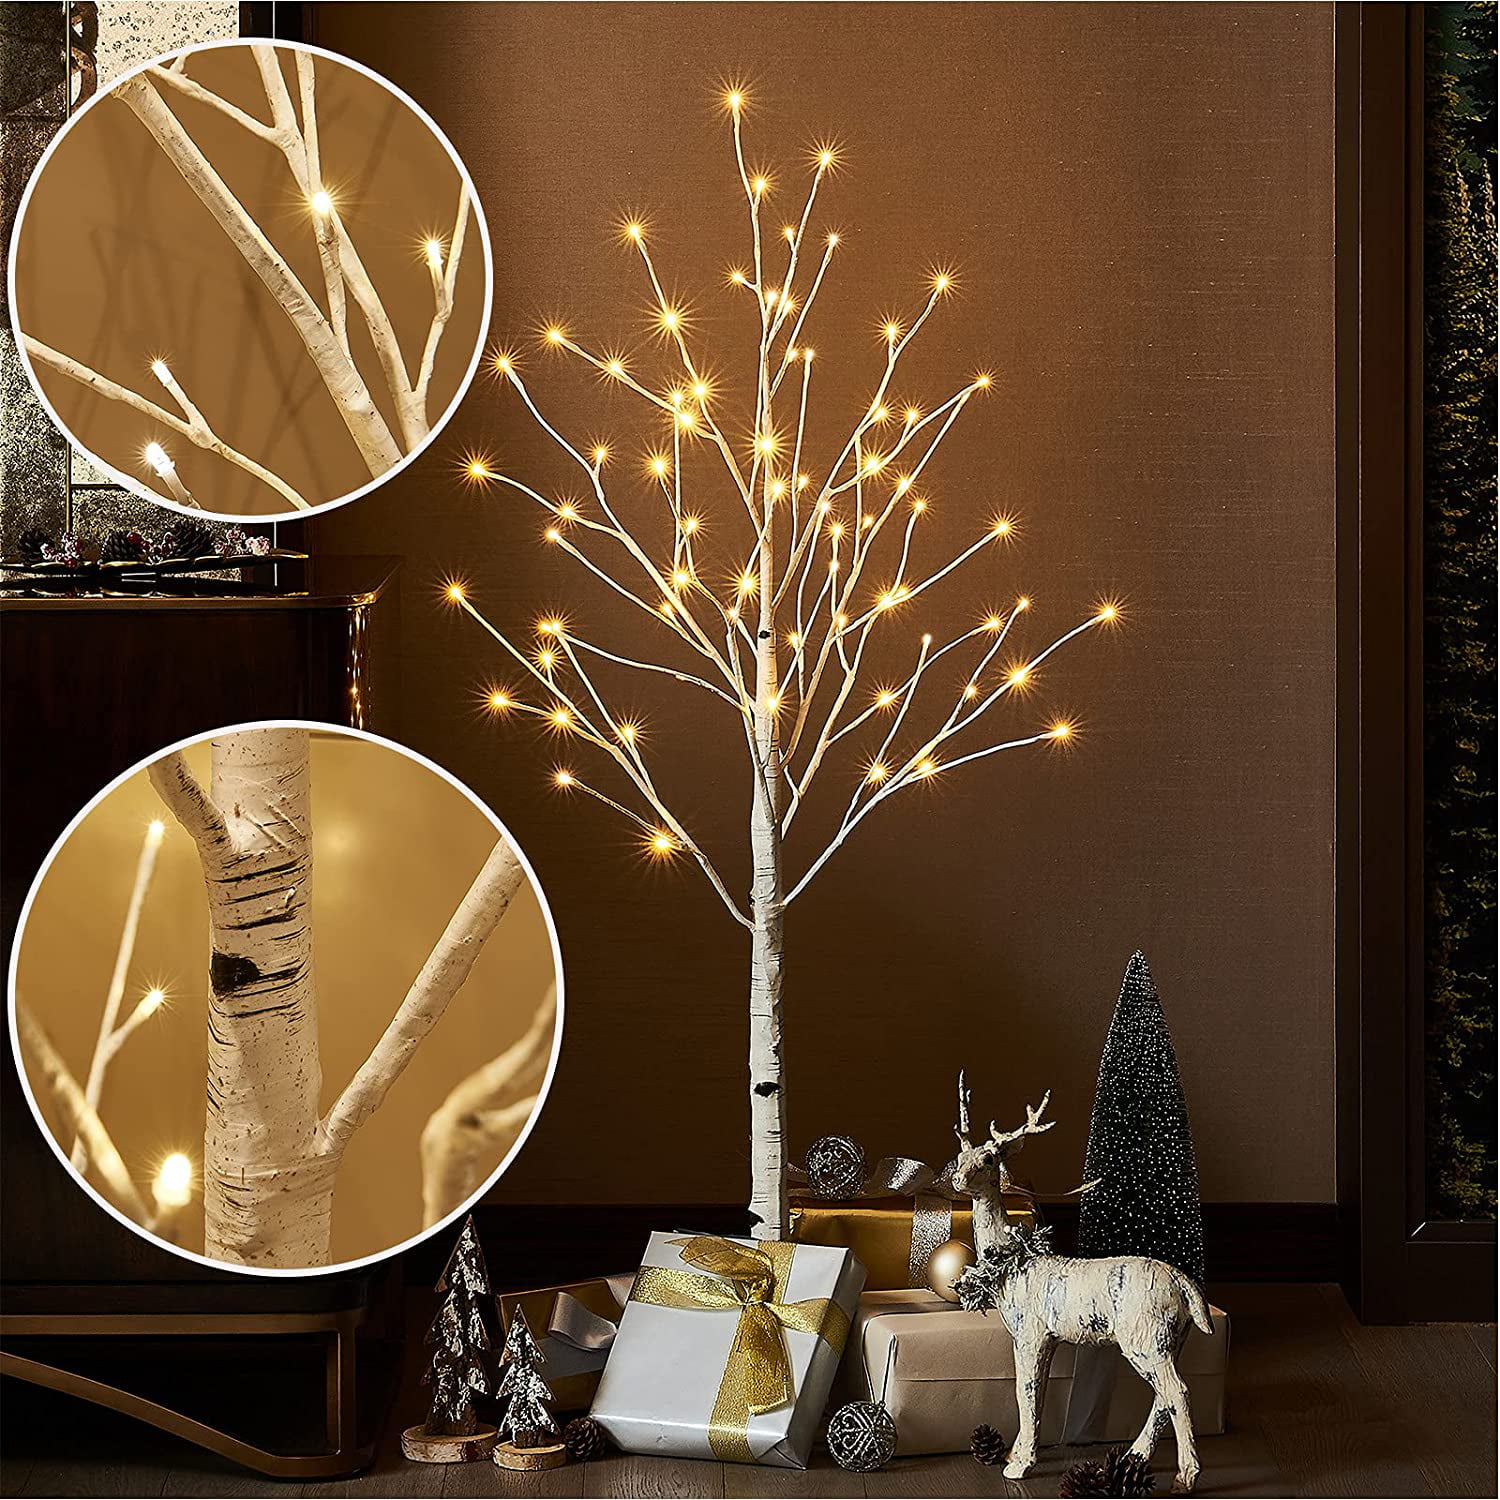 Vanthylit Pre-lit Birch Tree 2 Pack 5FT 6FT with Warm White for Party Wedding... 